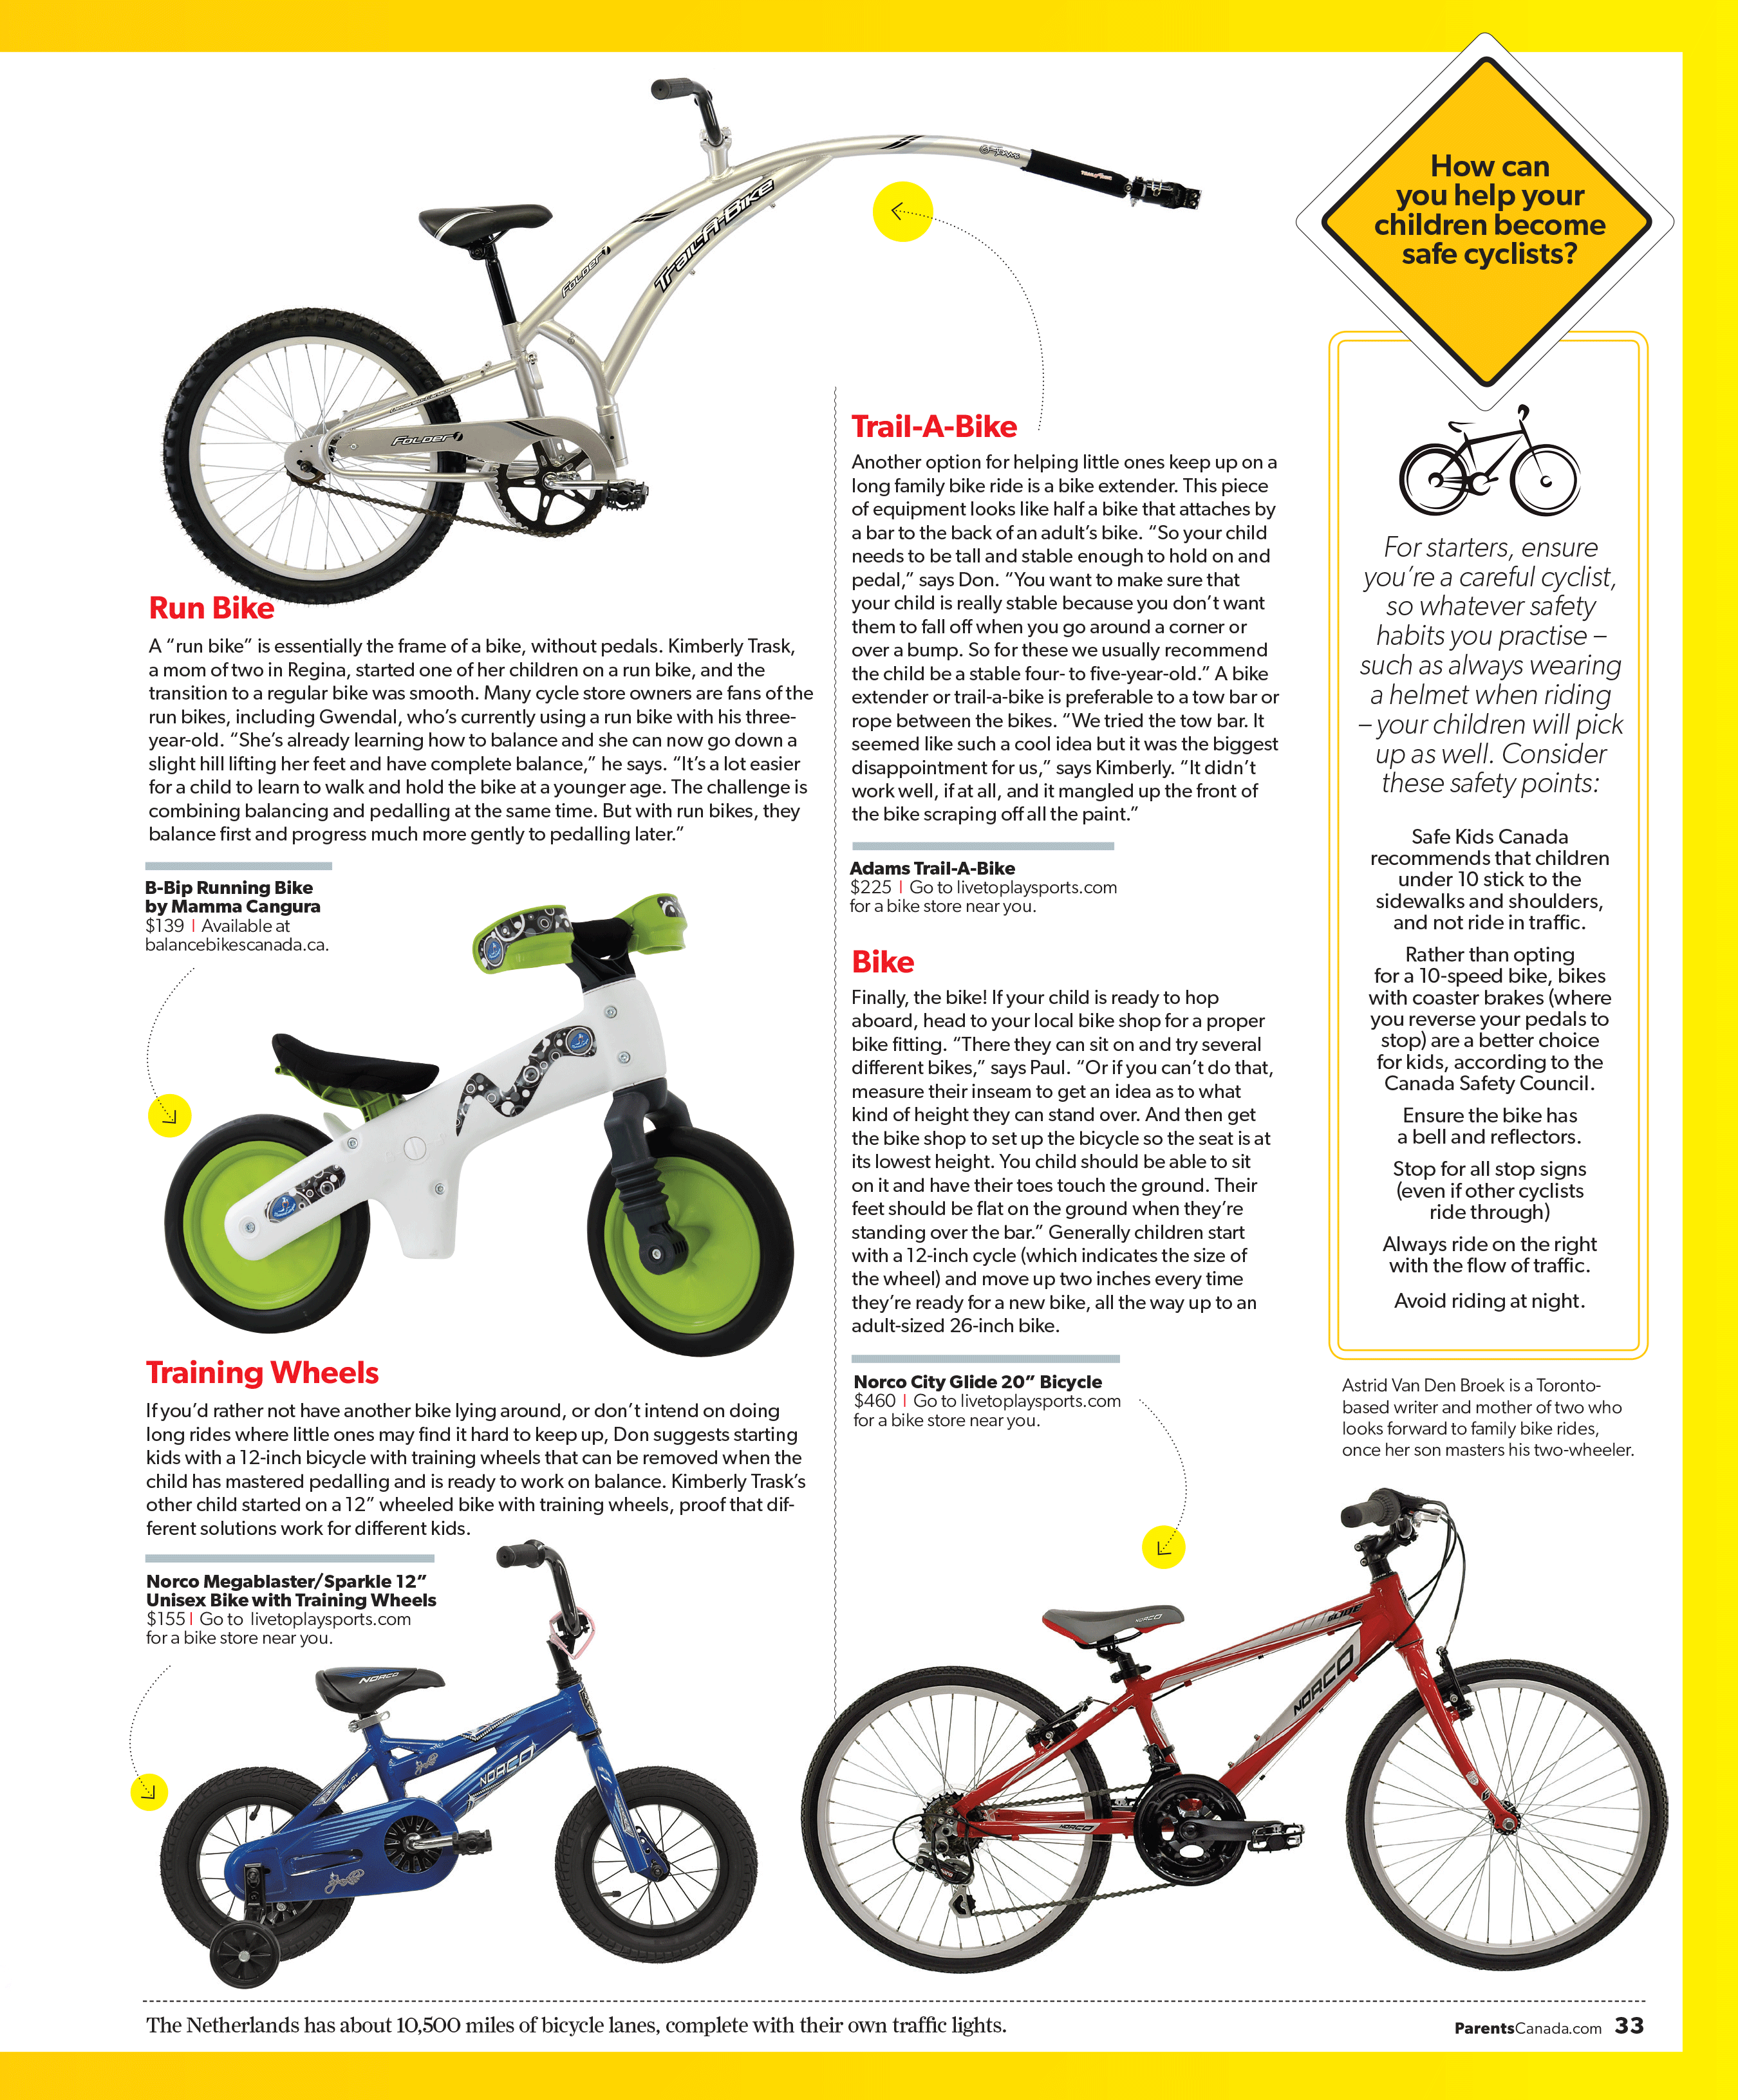 Child run bikes, bike with training wheels, Trail-A-Bike, and youth bicycles